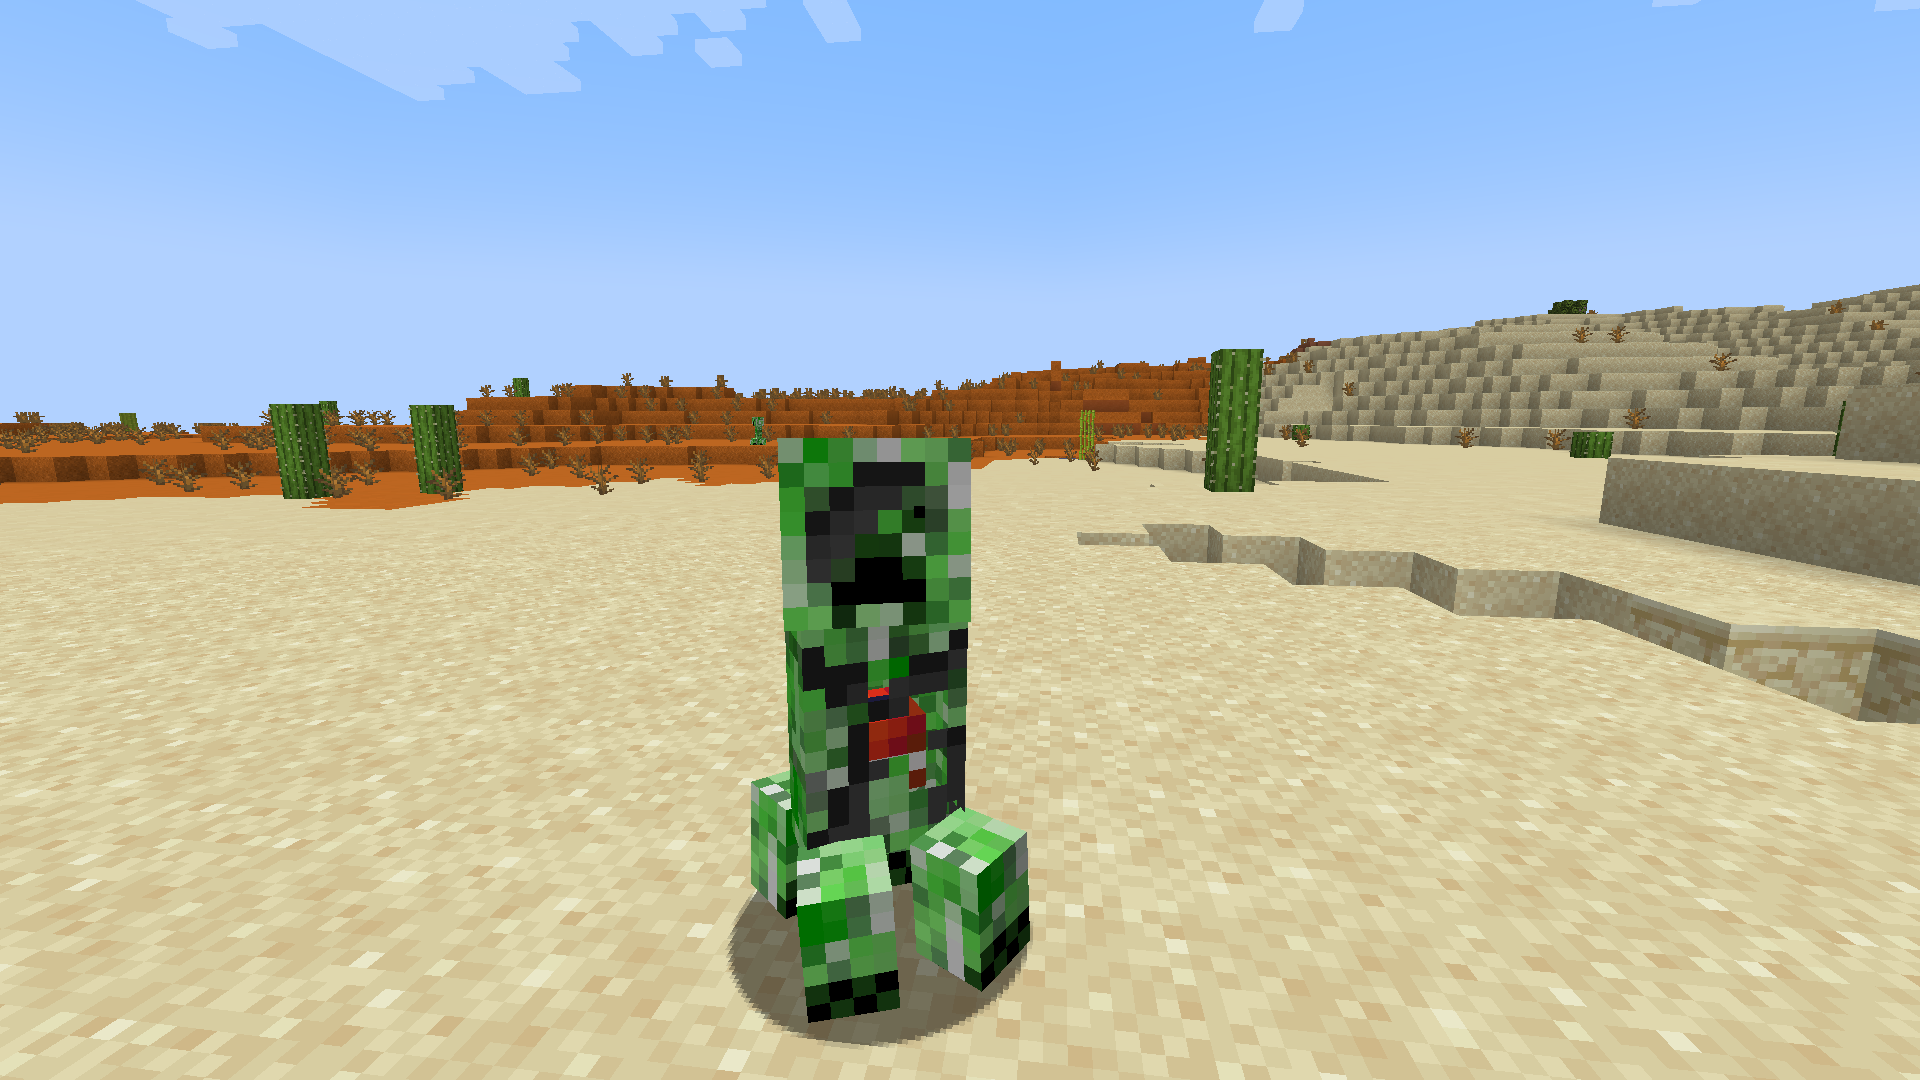 A dying creeper